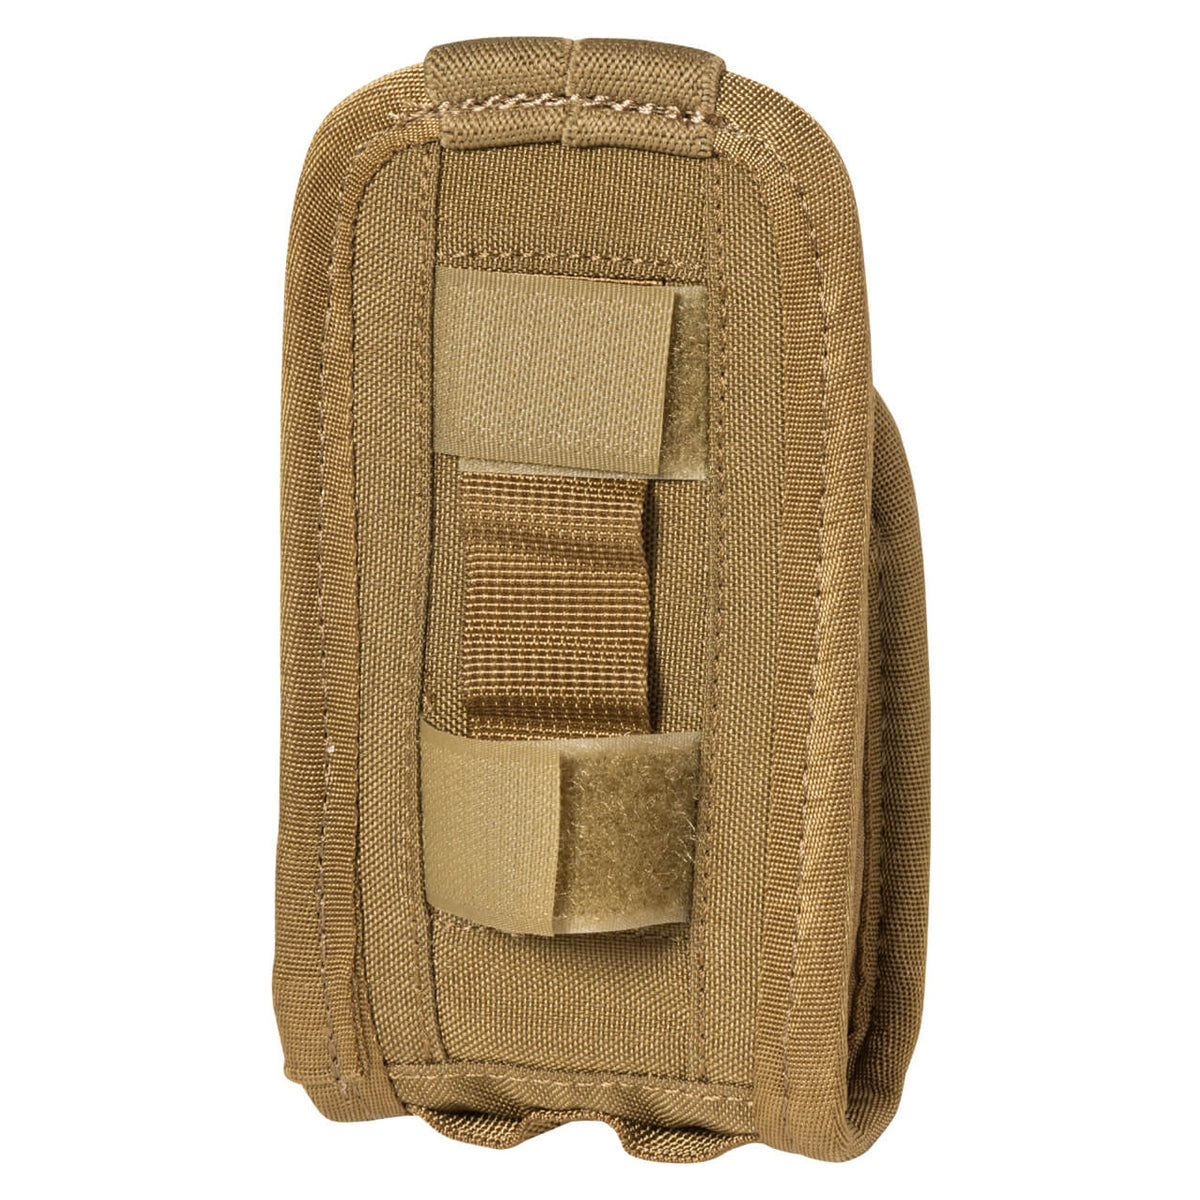 Mystery Ranch Quick Draw GPS Pouch in Mystery Ranch Quick Draw GPS Pouch by Mystery Ranch | Gear - goHUNT Shop by GOHUNT | Mystery Ranch - GOHUNT Shop